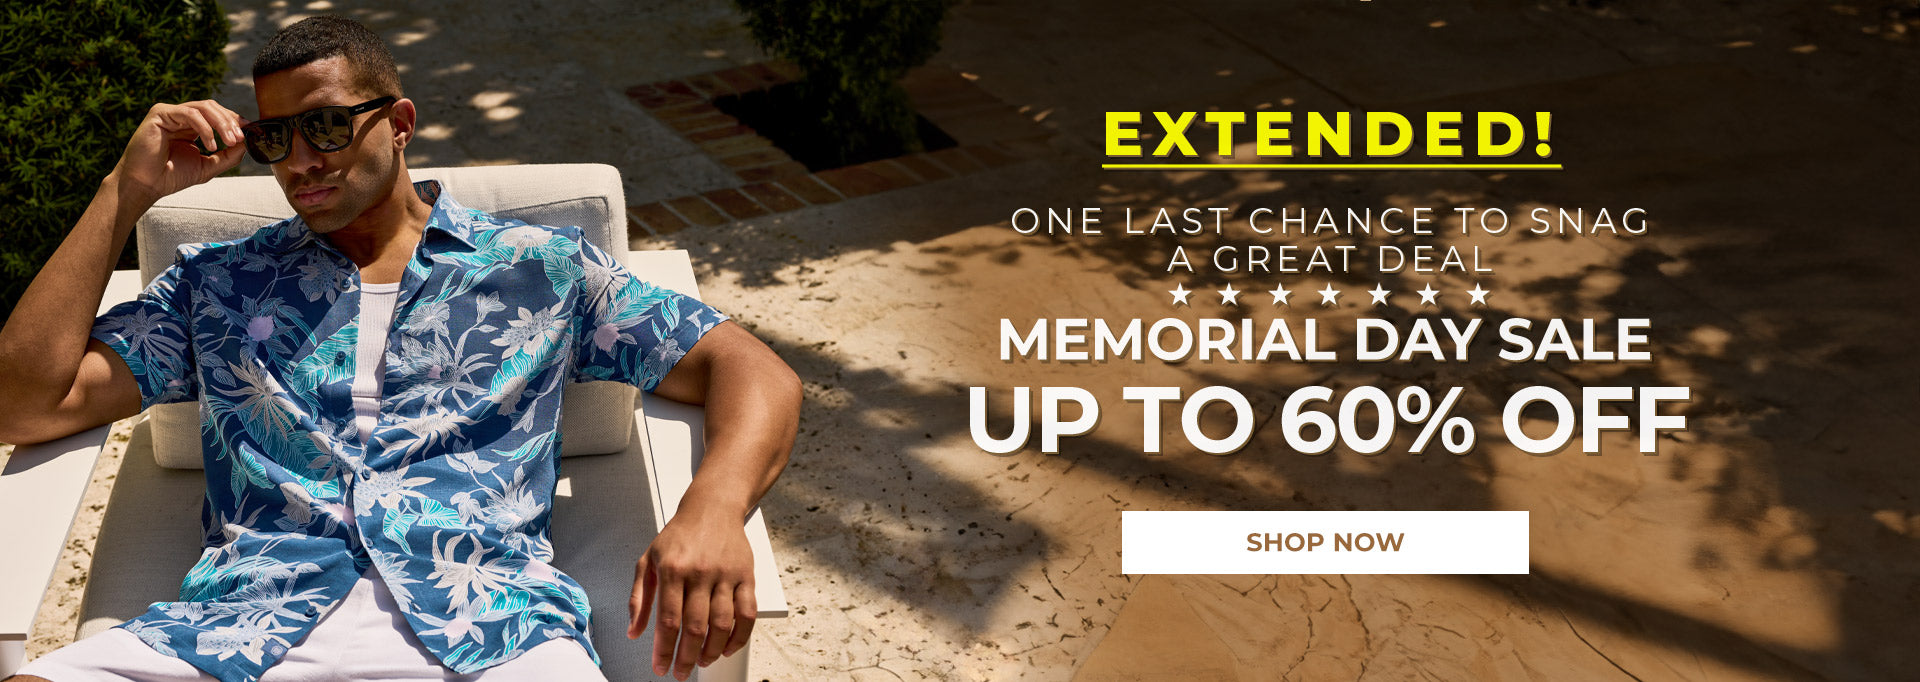 MEMORIAL DAY SALE: UP TO 60% OFF - Shop Now - Shop Now